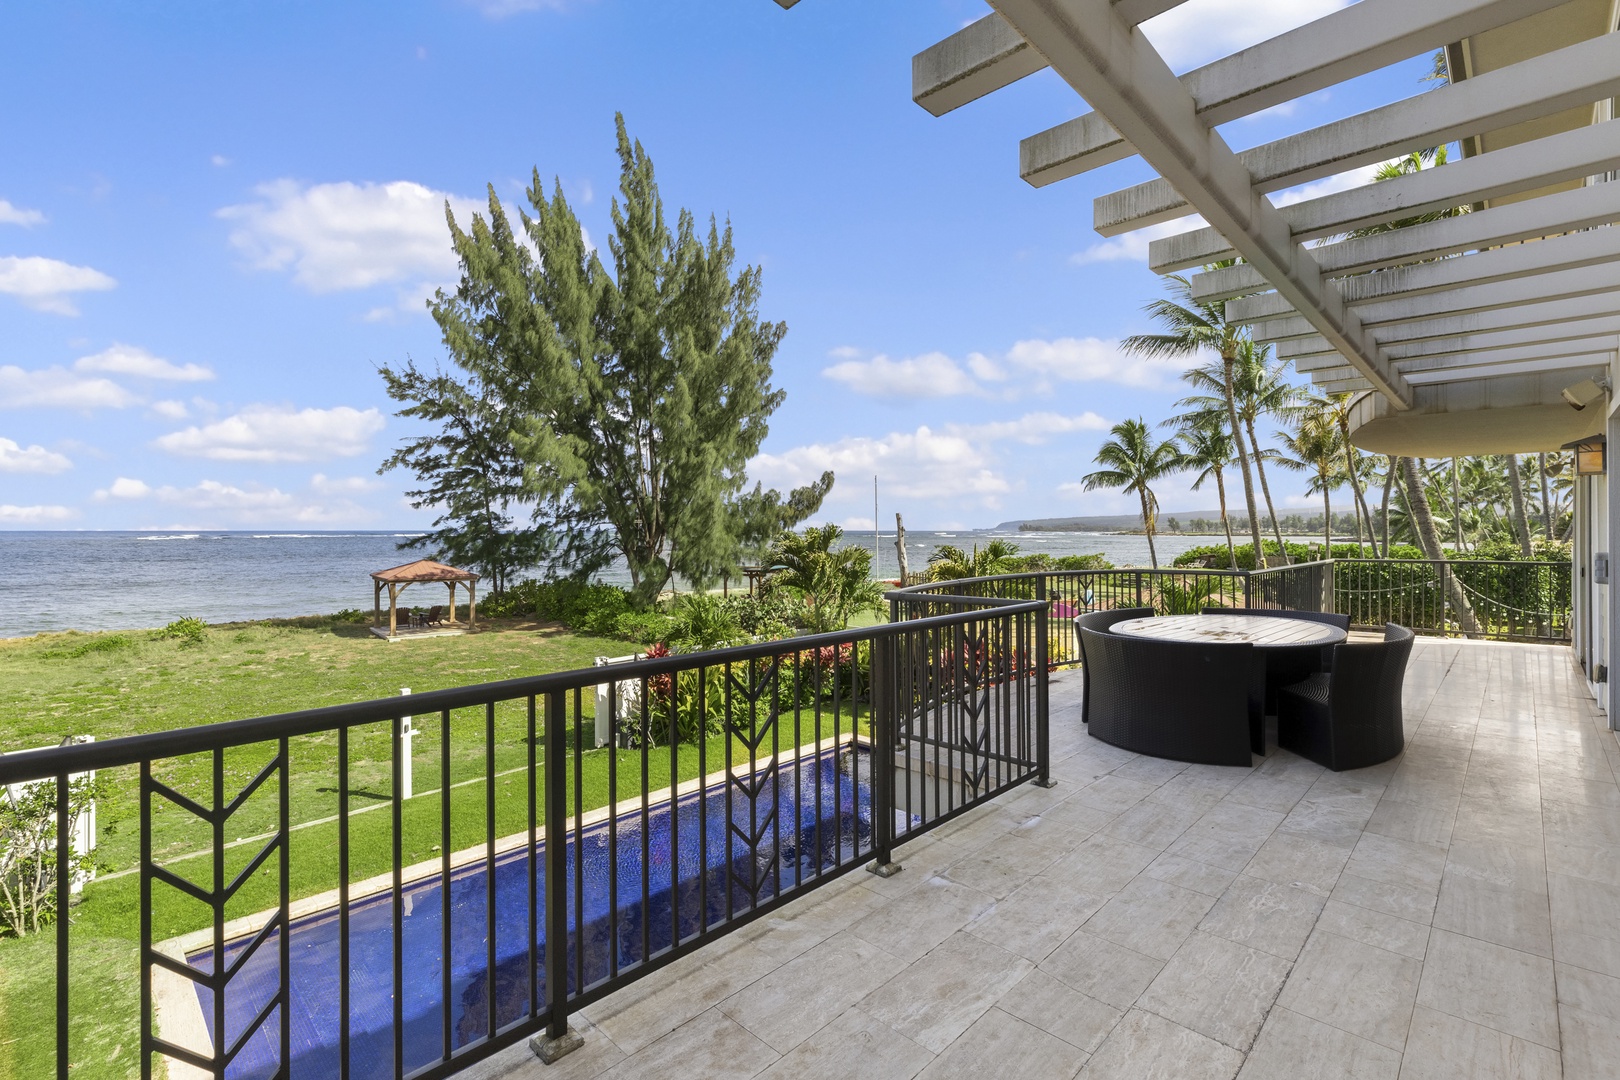 Waialua Vacation Rentals, Waialua Beachfront Estate - Whether you're lounging with your feet in the pool, basking in the sun on the deck, or enjoying a refreshing cocktail under the stars, your Hawaii getaway is sure to be unforgettable